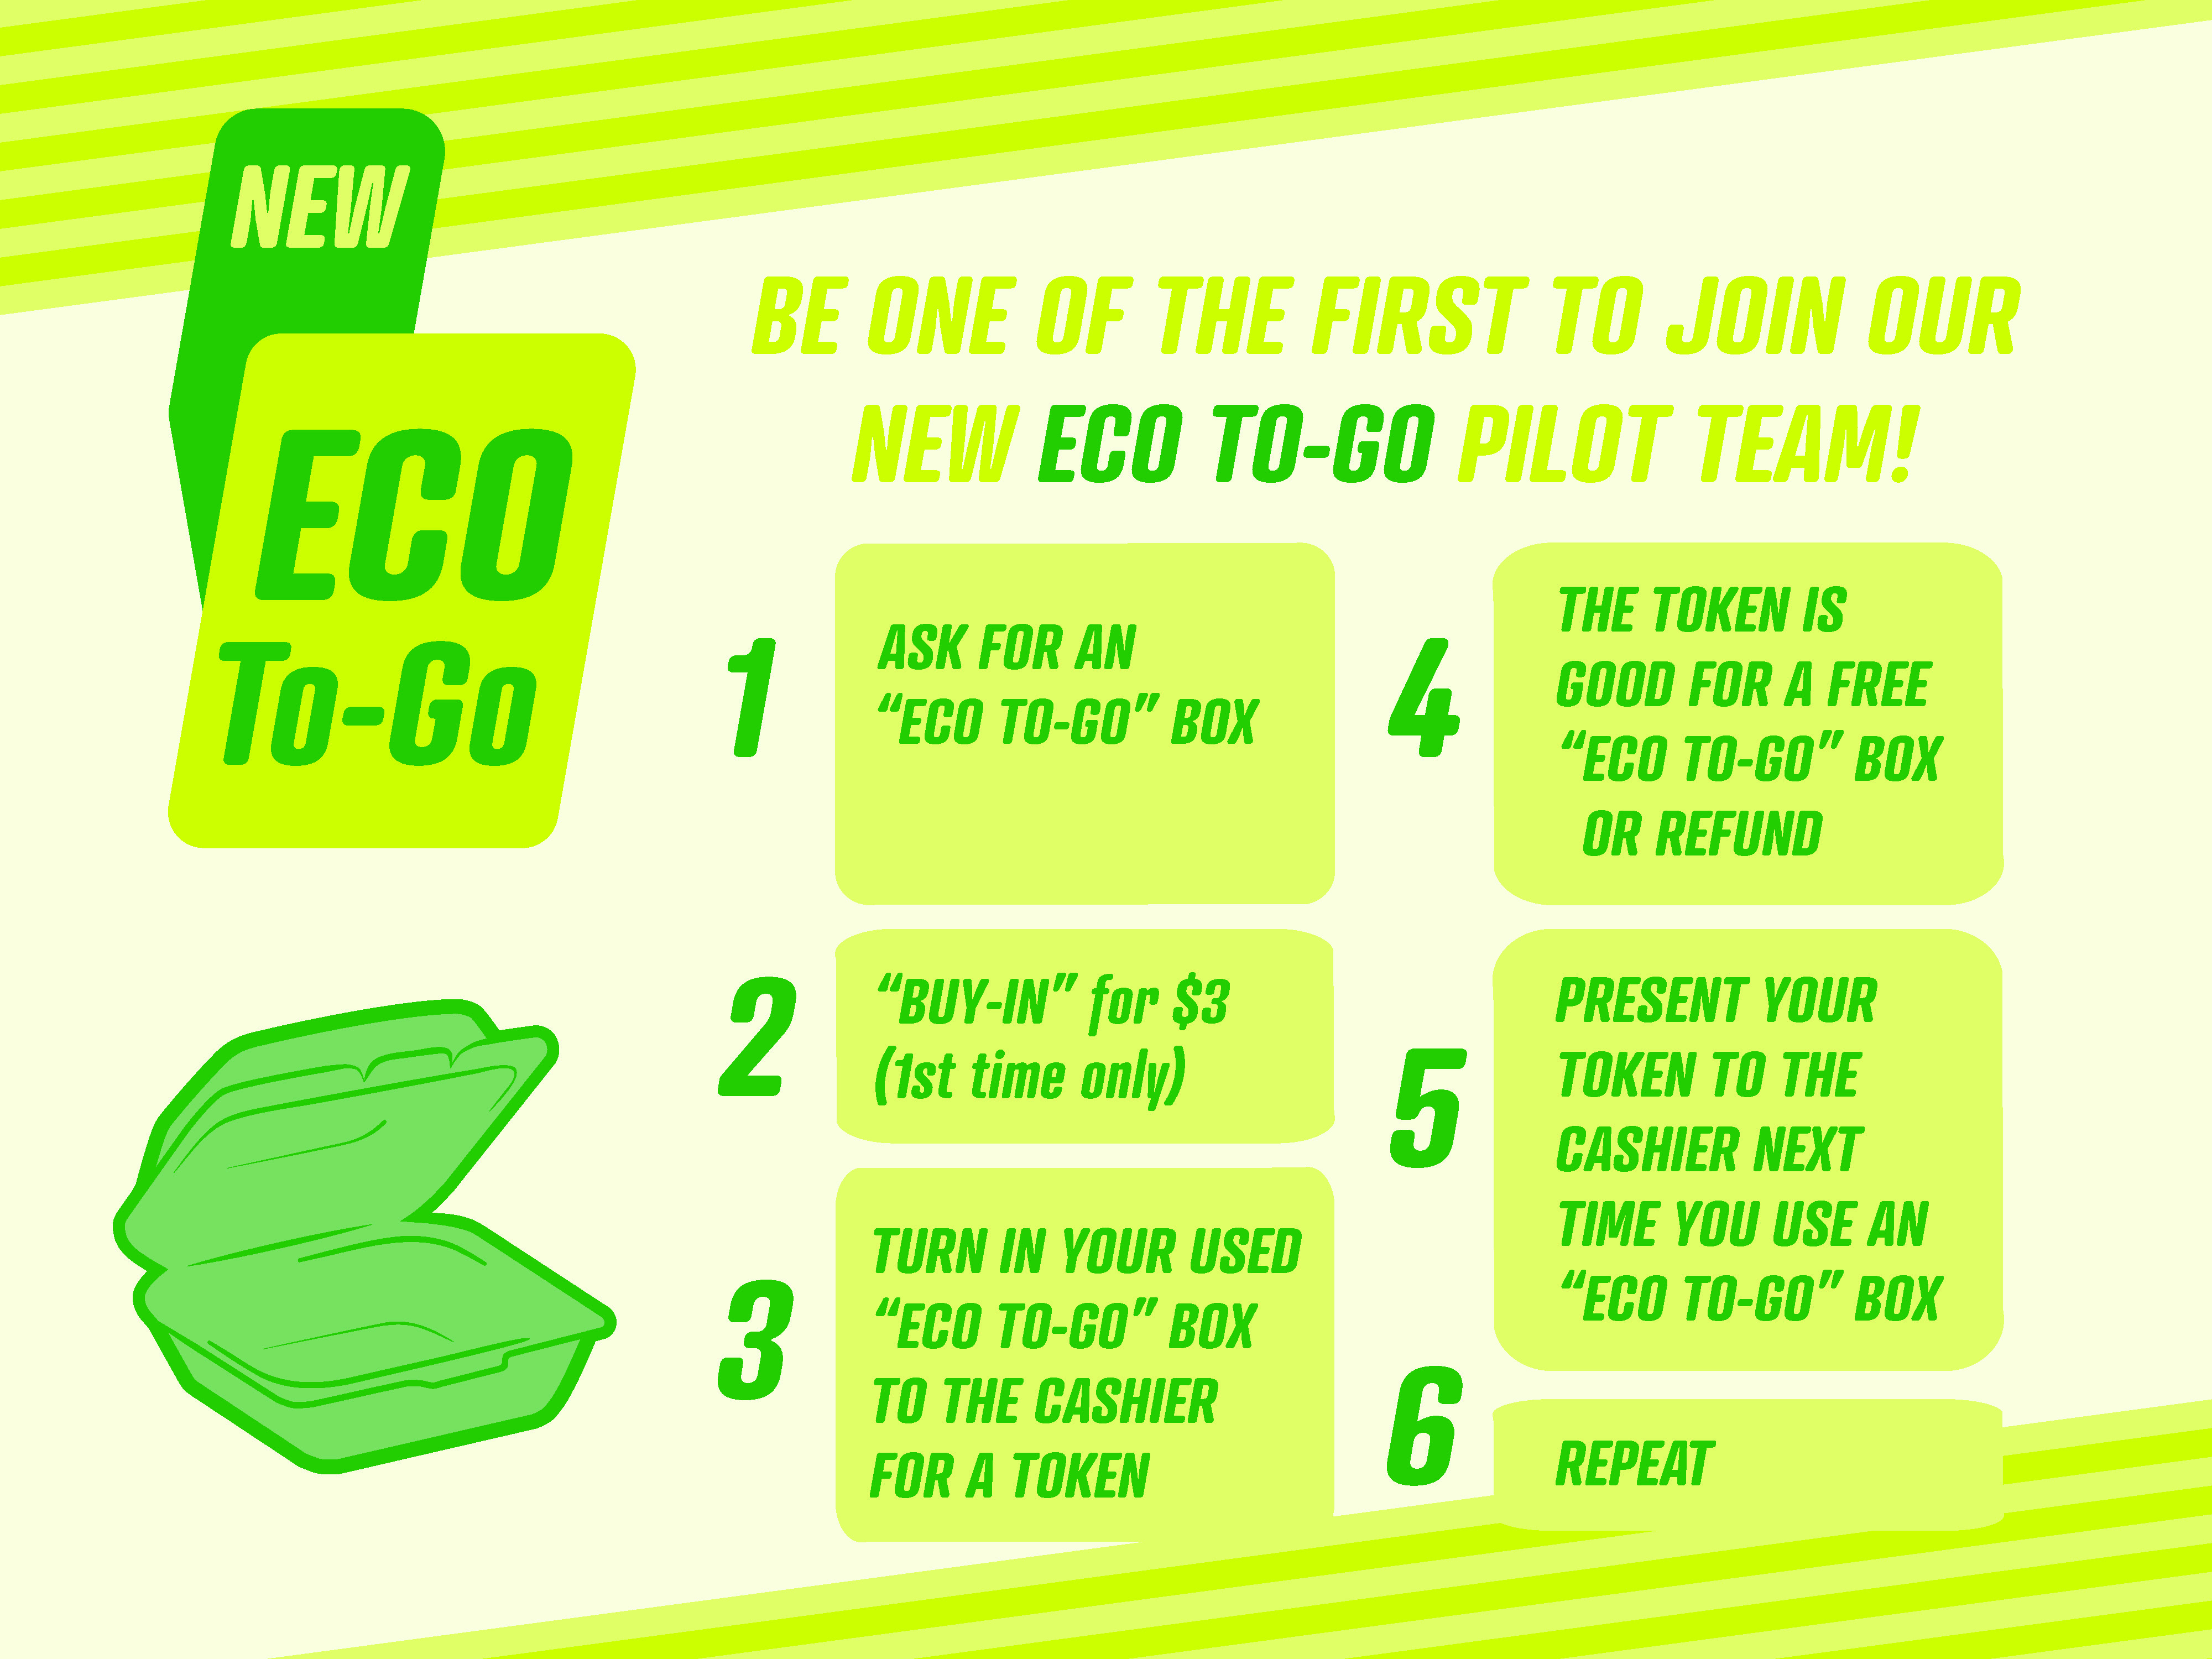 Eco-To-Go info at PCC